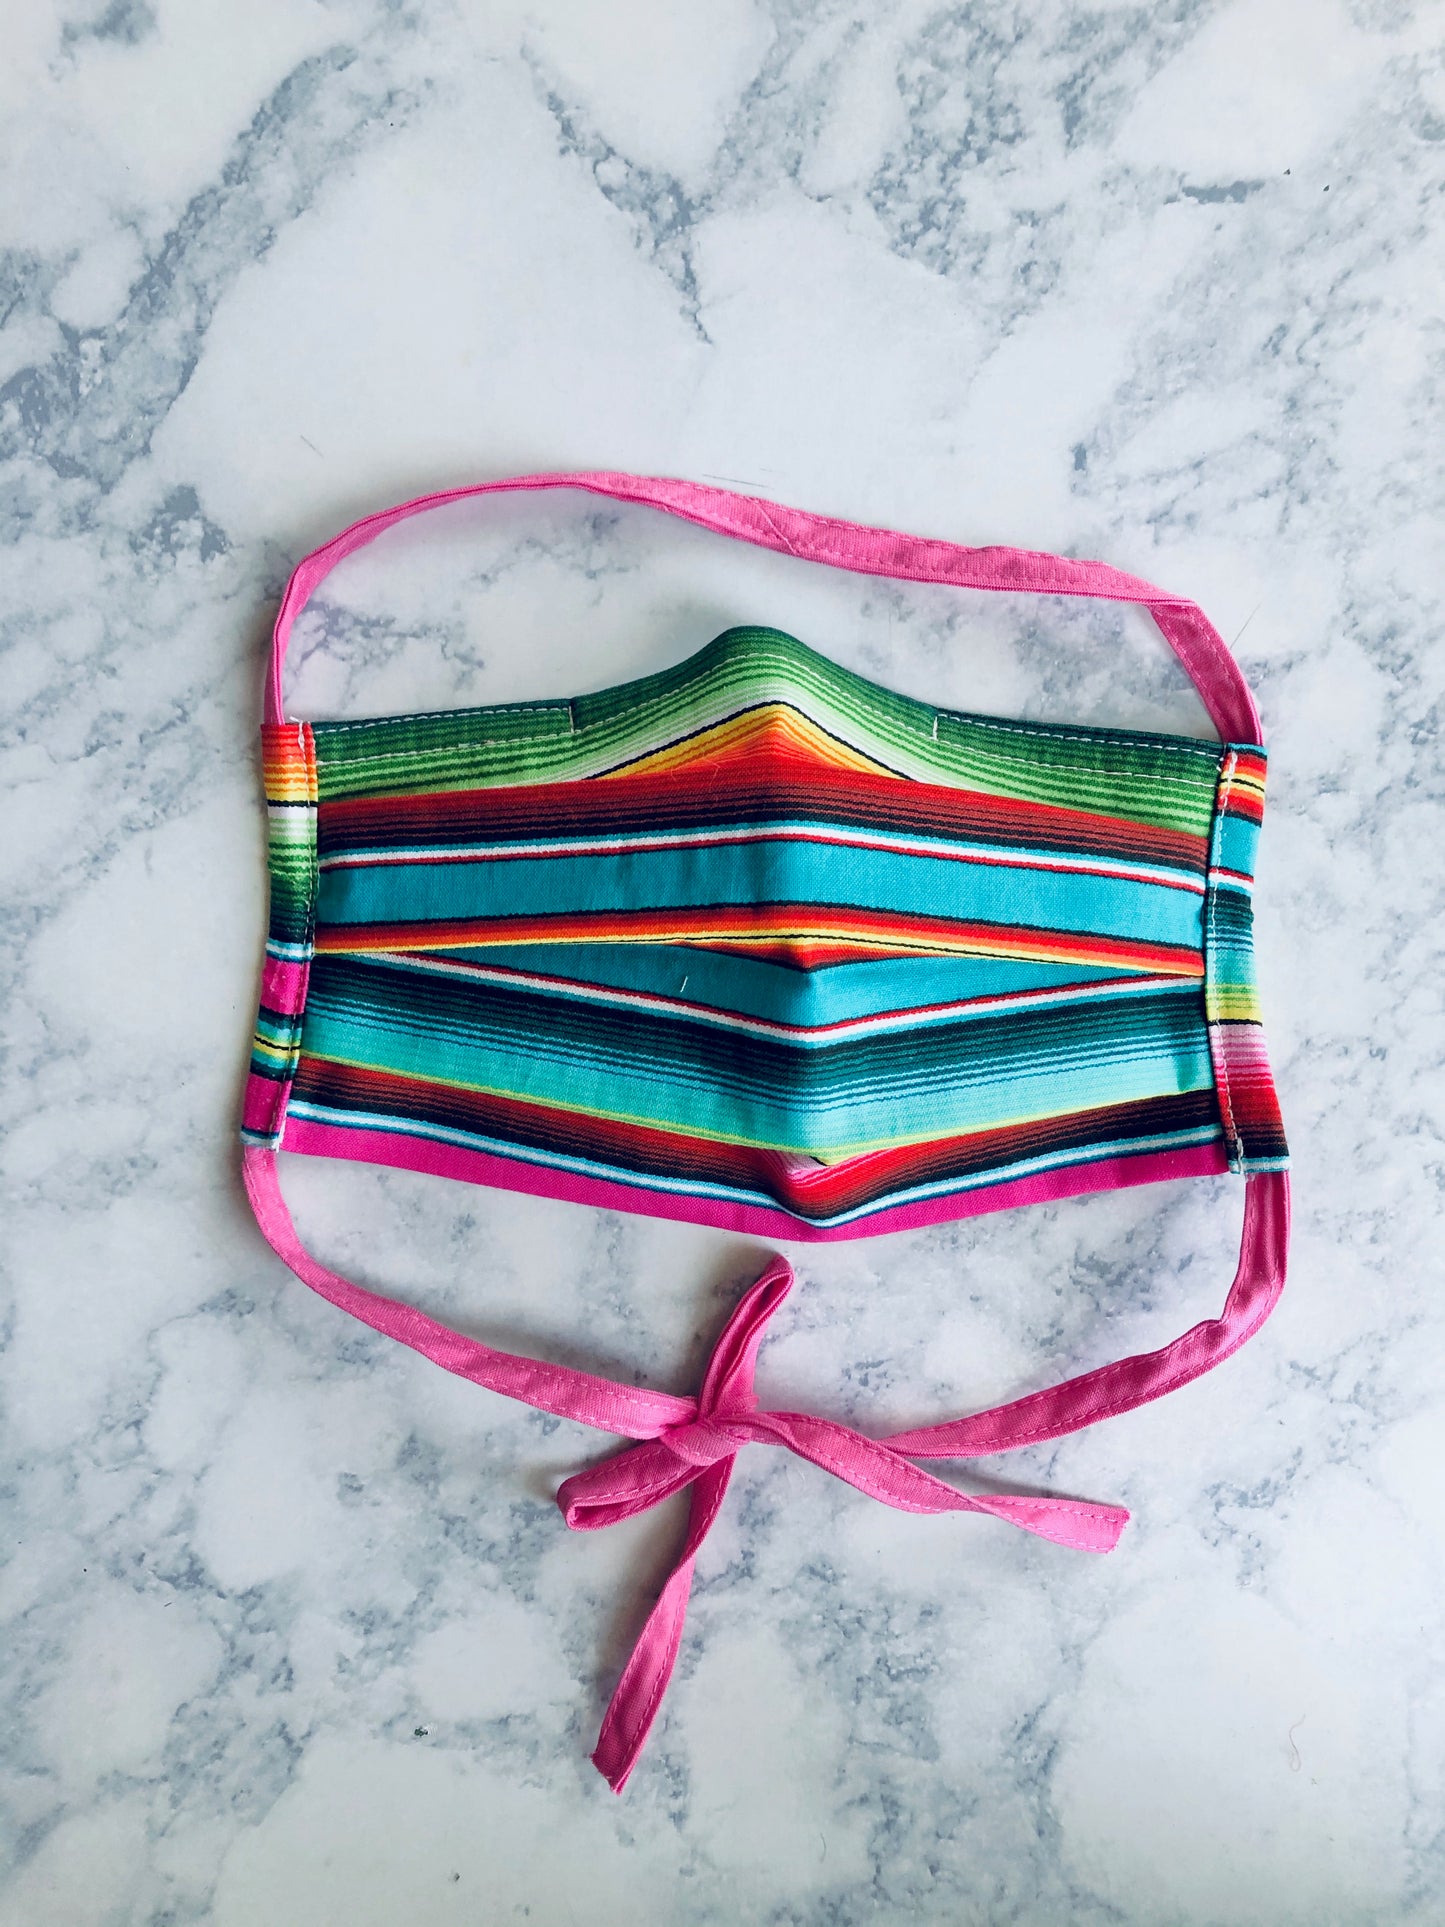 Teal/Pink Serape Surgical Mask with nose clip, Adult Face Mask